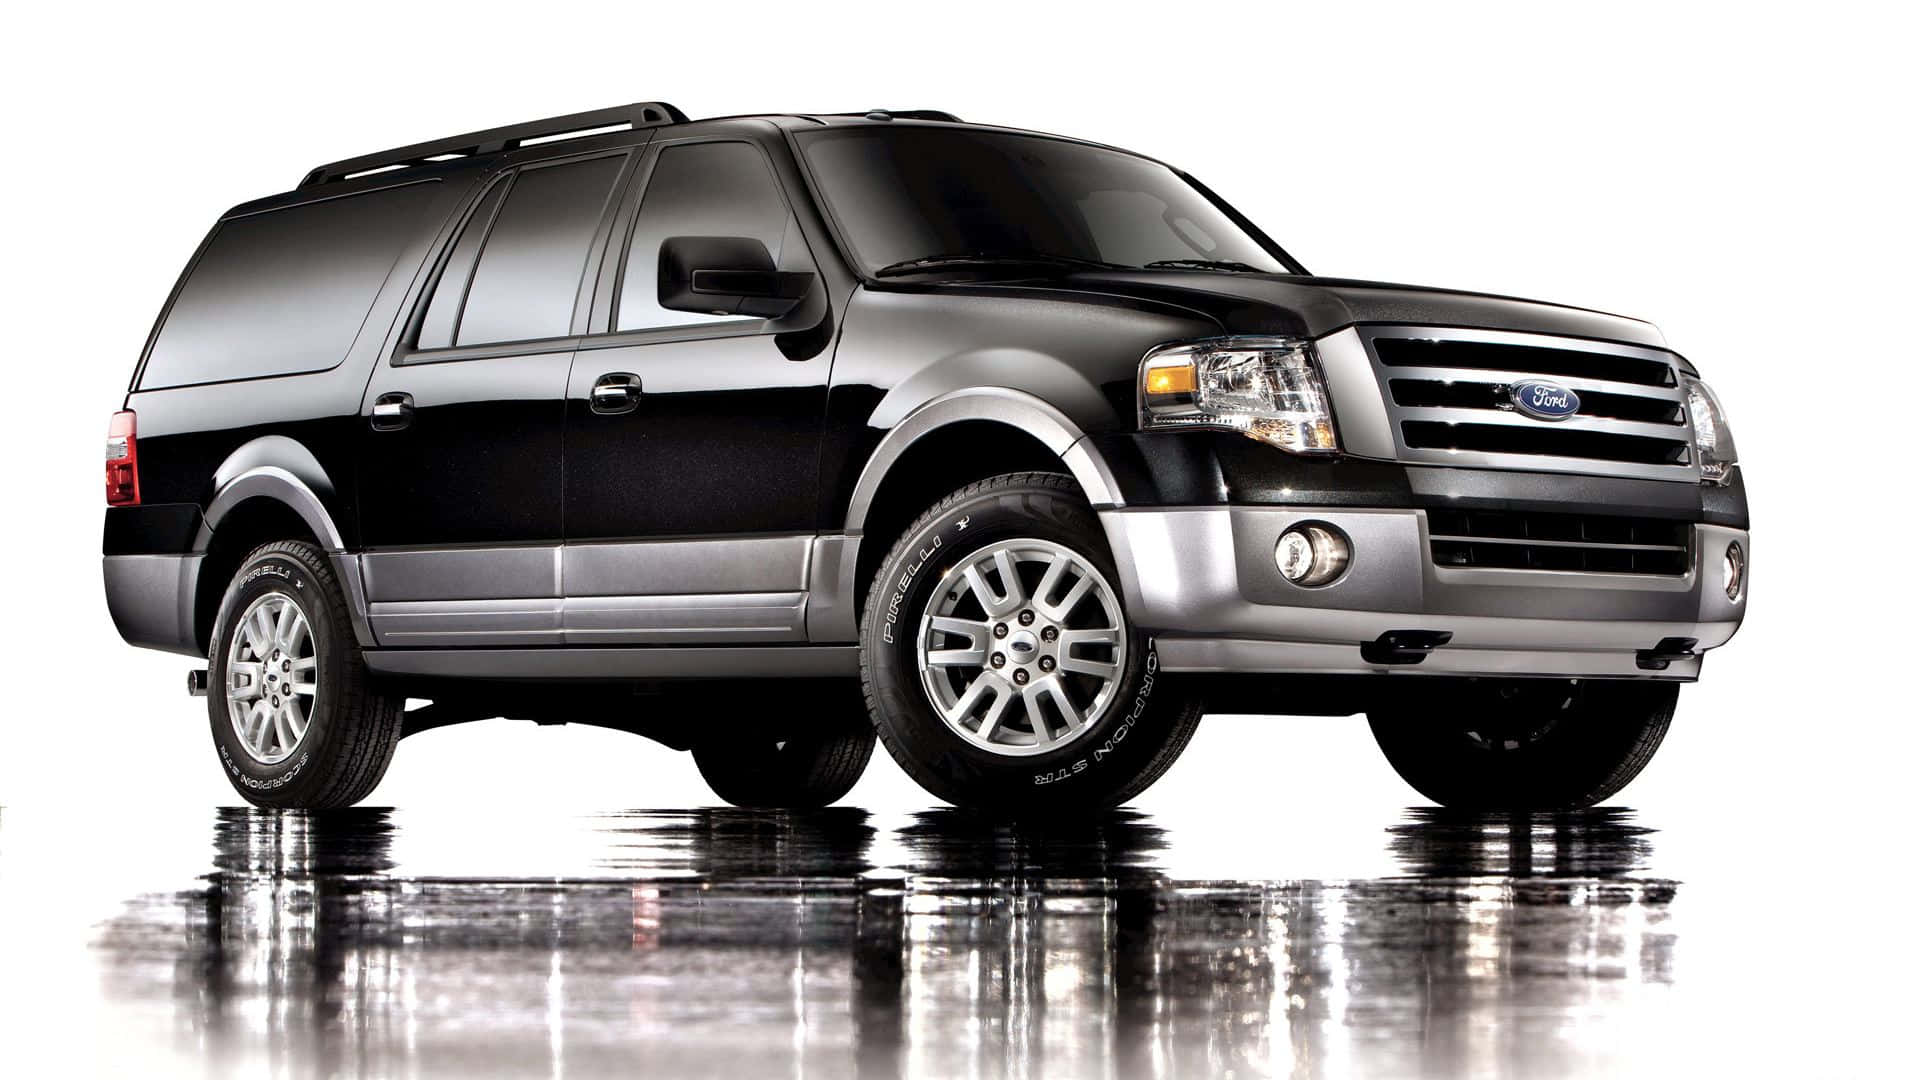 Powerful Ford Expedition traversing the rugged terrain Wallpaper